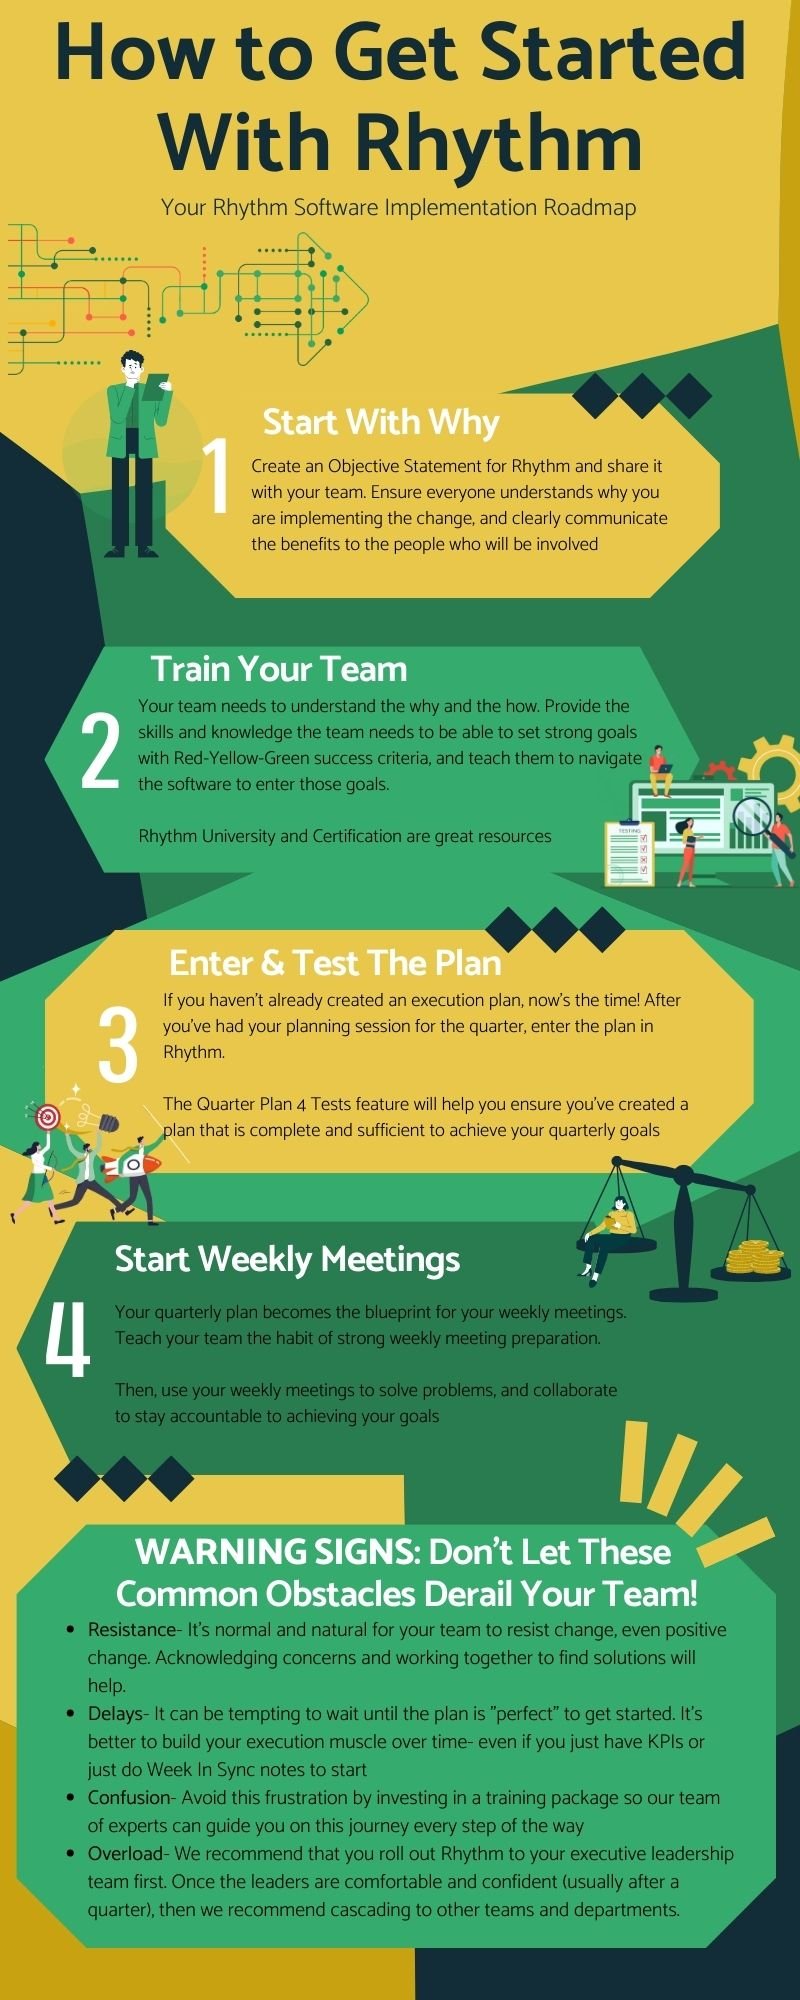 How to get started with Rhythm Roadmap Infographic (1)